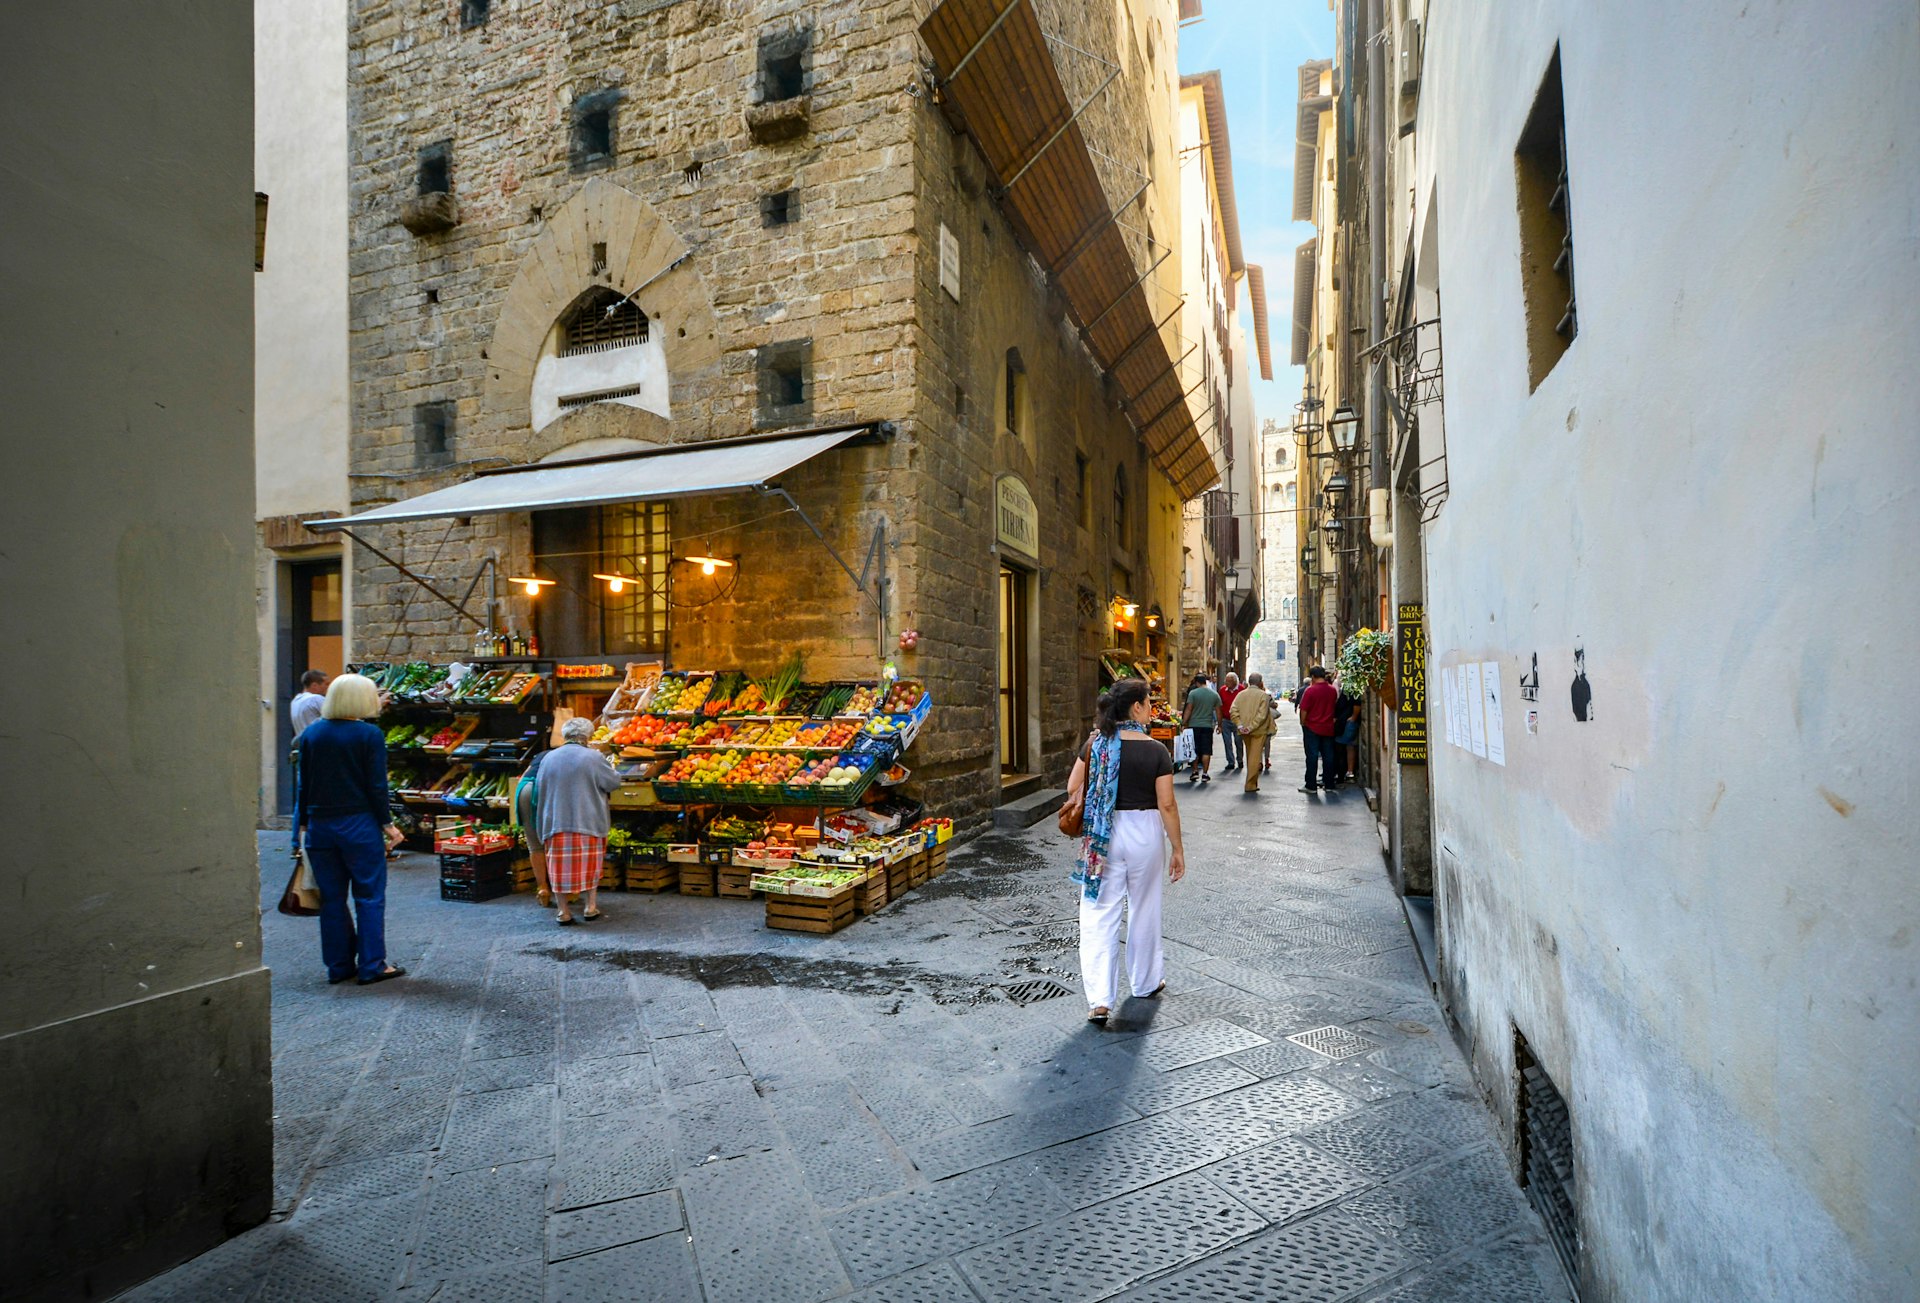 A fresh produce market with some local shoppers in a narrow alley in Florence.